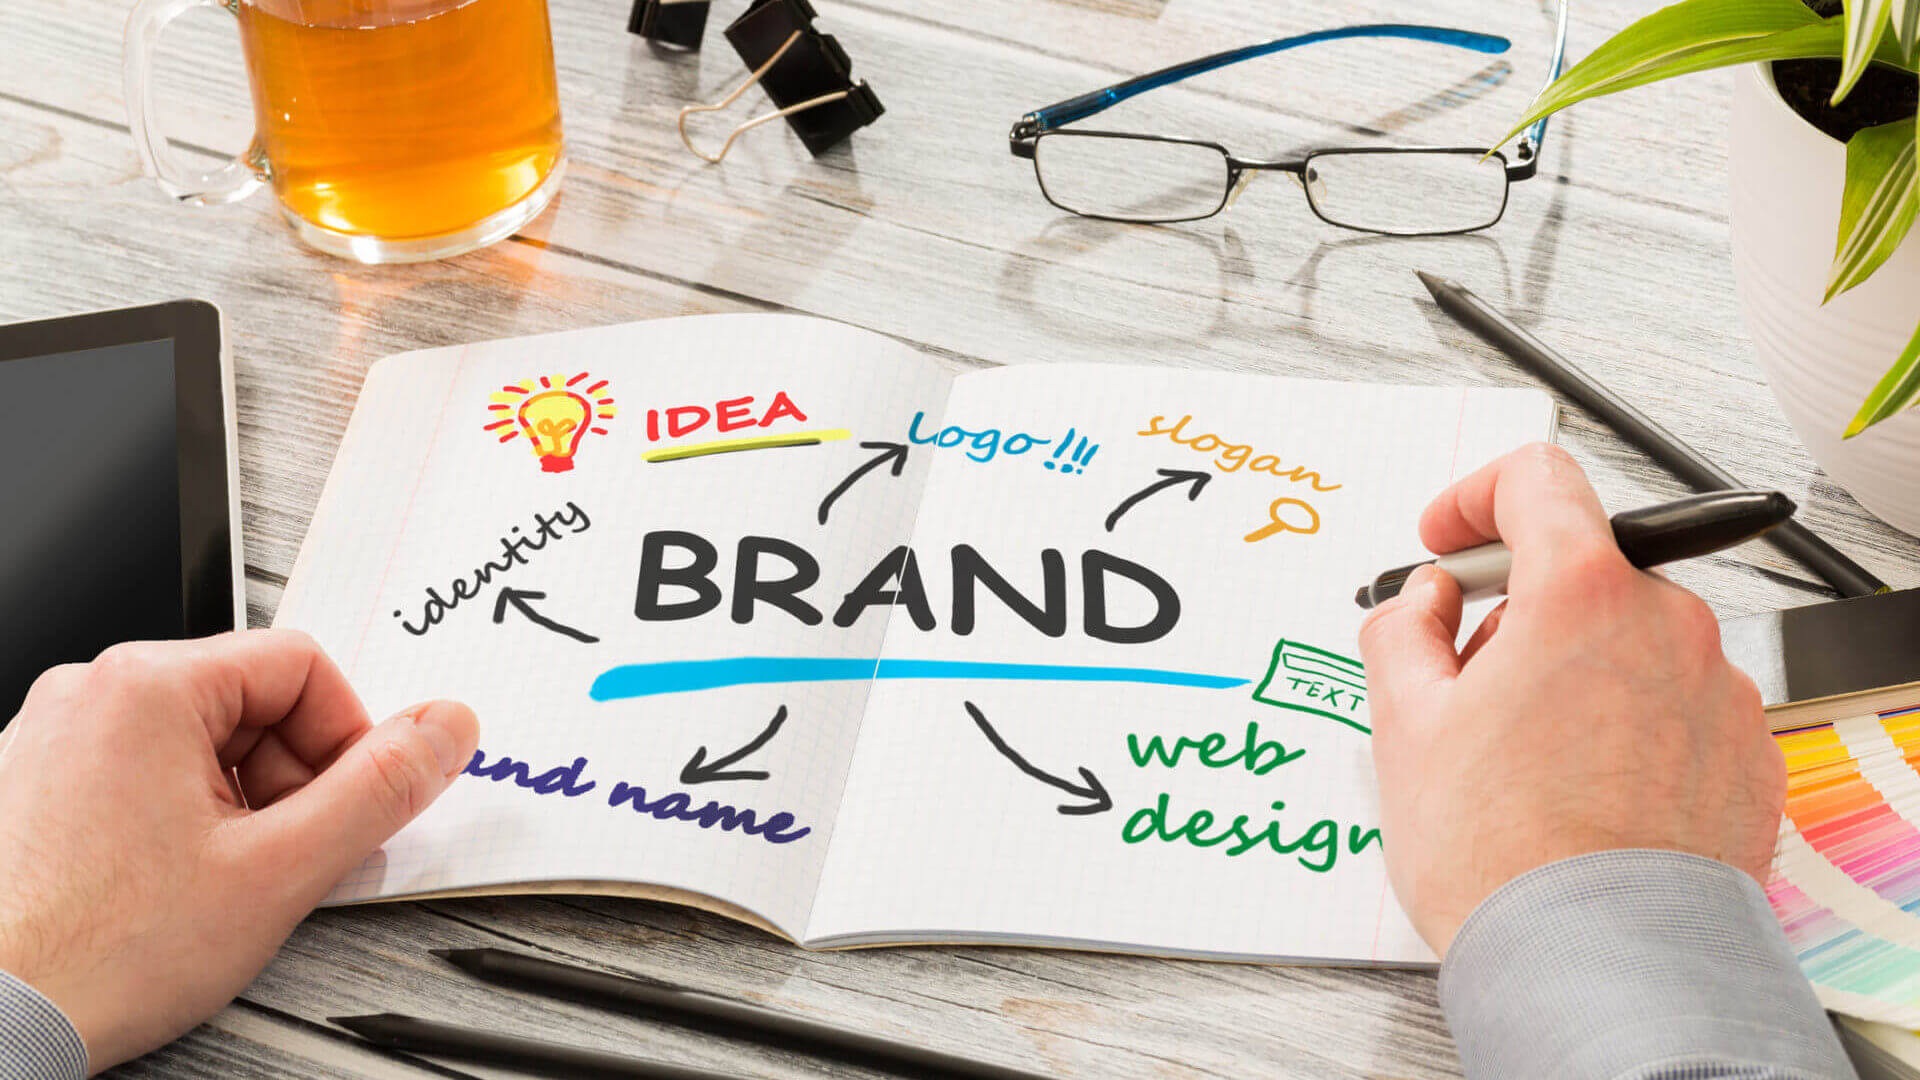 Social Networking Strategy And Branding – Brand Identity Is Produced With A Prism